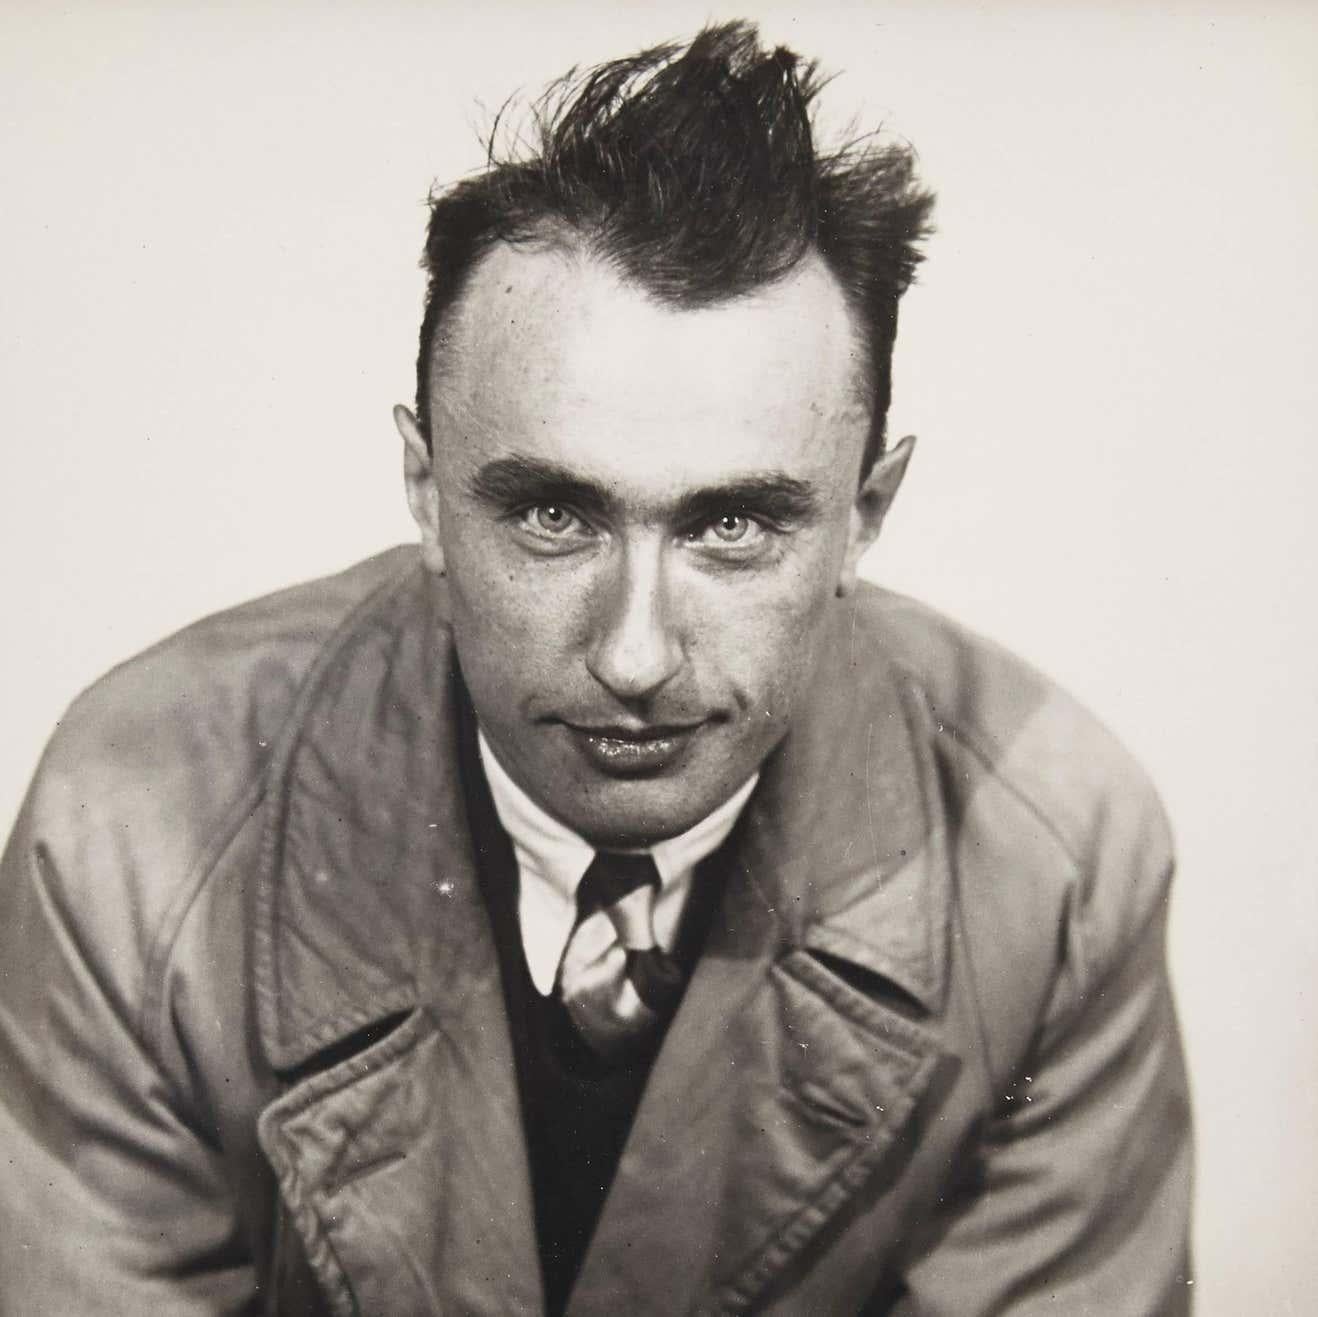 Portrait of Yves Tanguy photographed by Man Ray, circa 1930.

A posthumous print from the original negative in 1977 by Pierre Gassmann.

Gelatin silver bromide.

Born (Philadelphia, 1890-Paris, 1976) Emmanuel Radnitzky, Man Ray adopted his